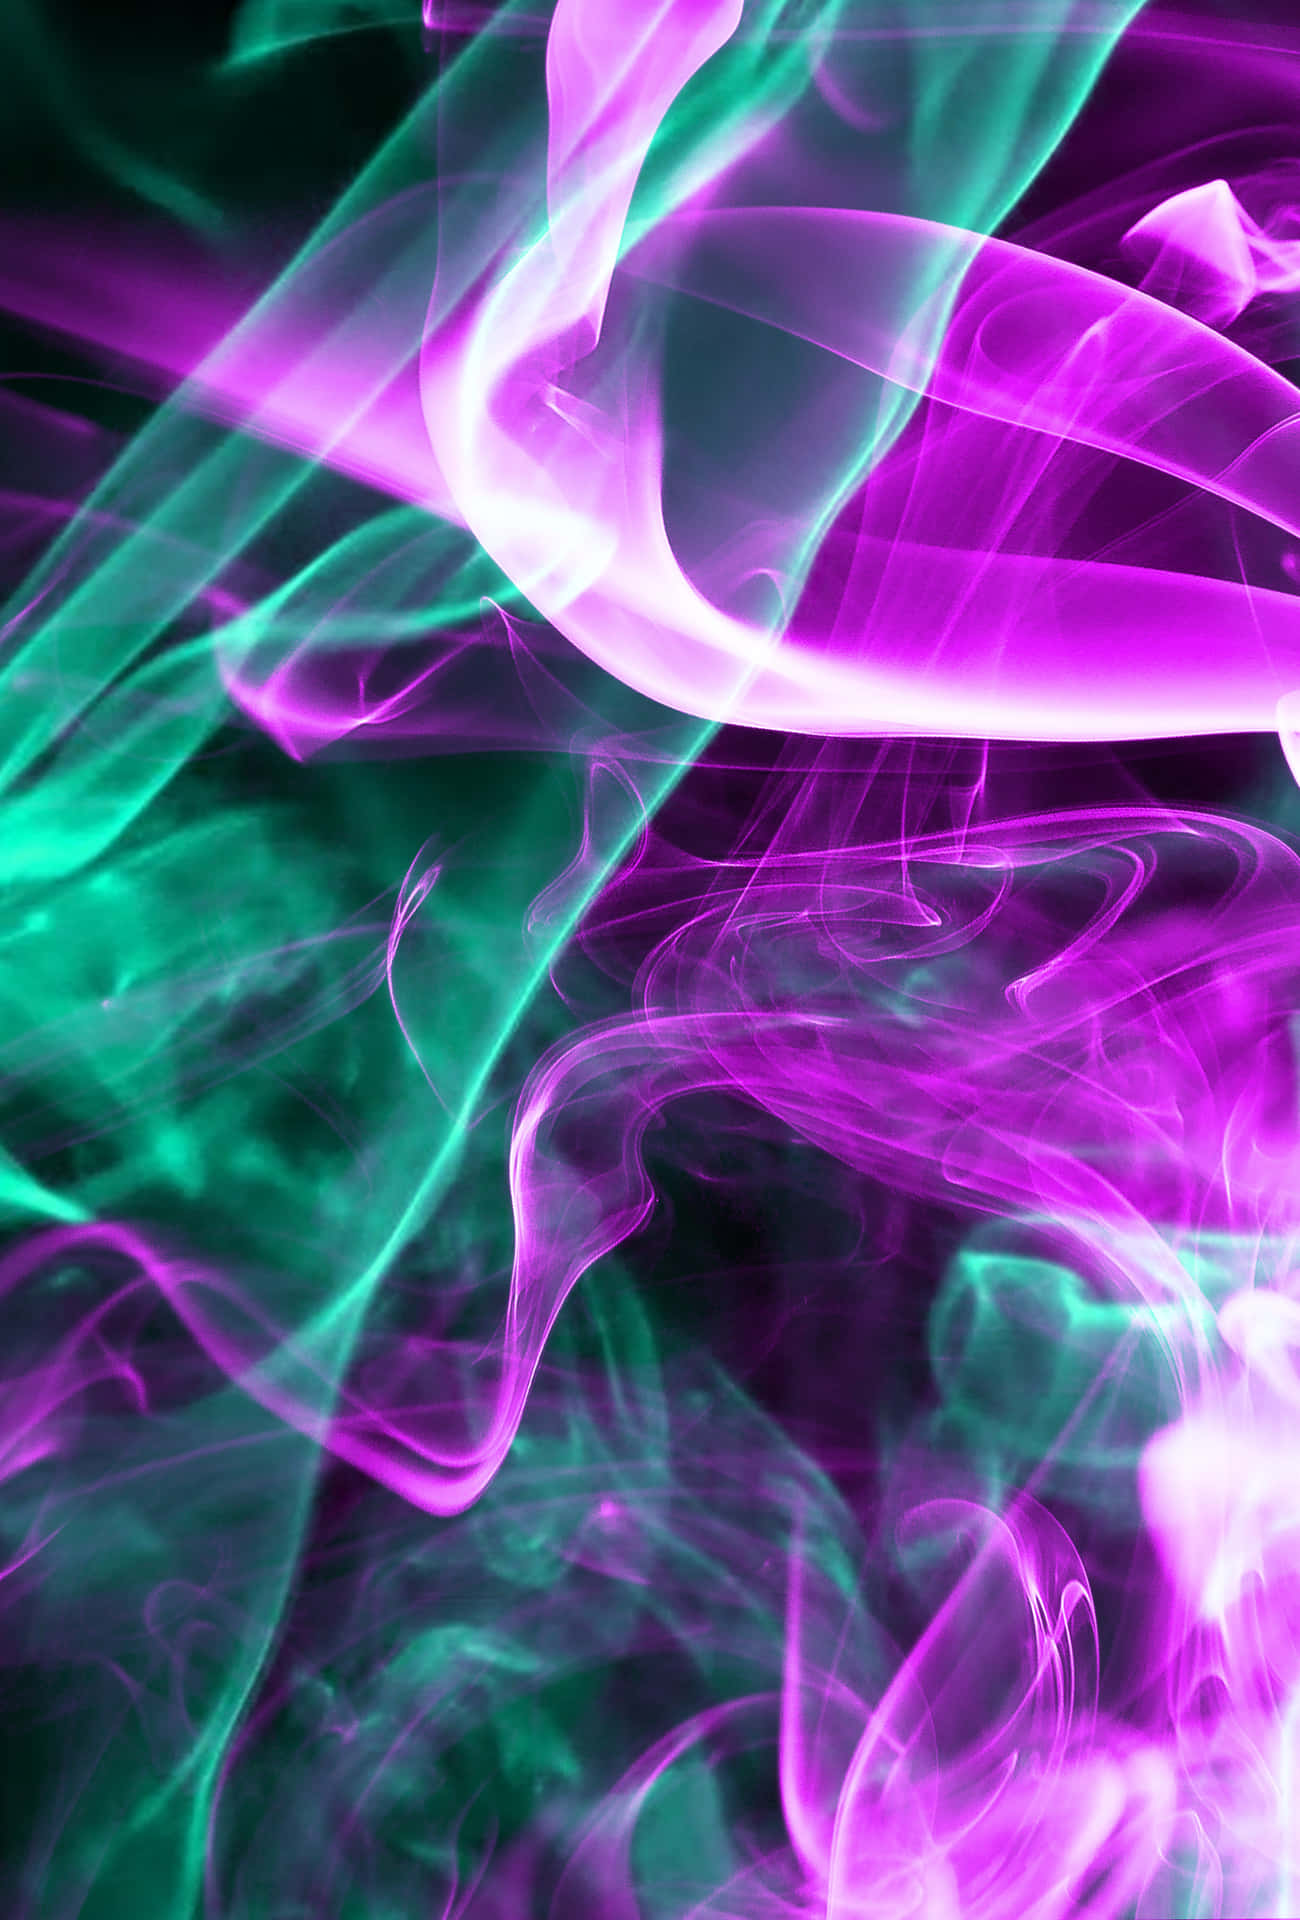 Abstract 2140 X 3160 Background